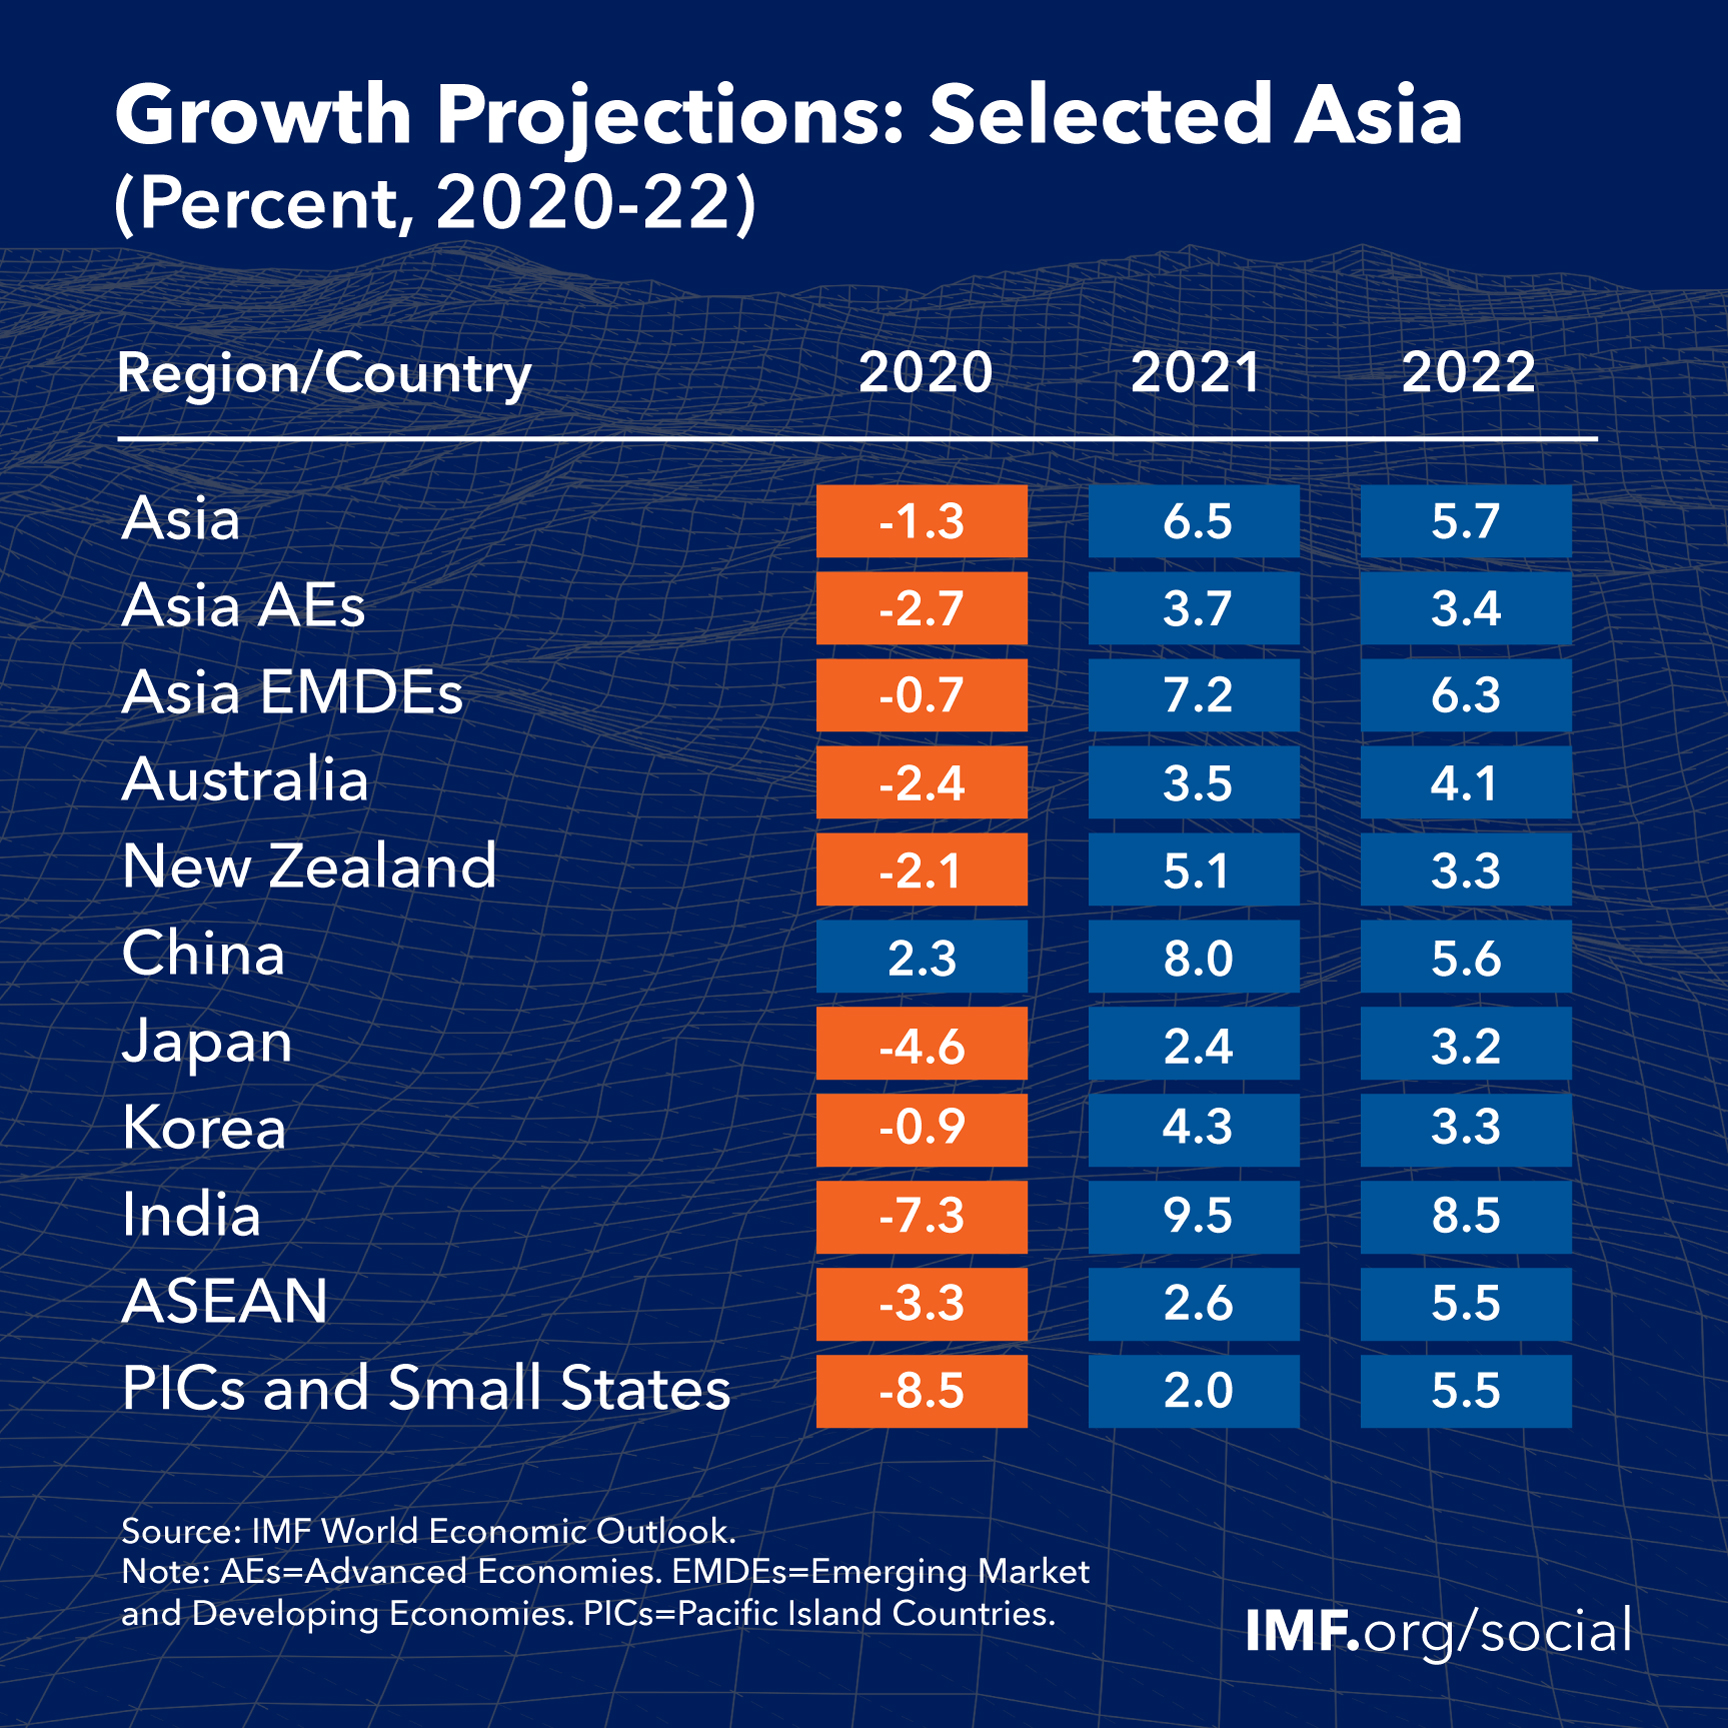 Regional Economic Outlook for Asia and Pacific, October 2021